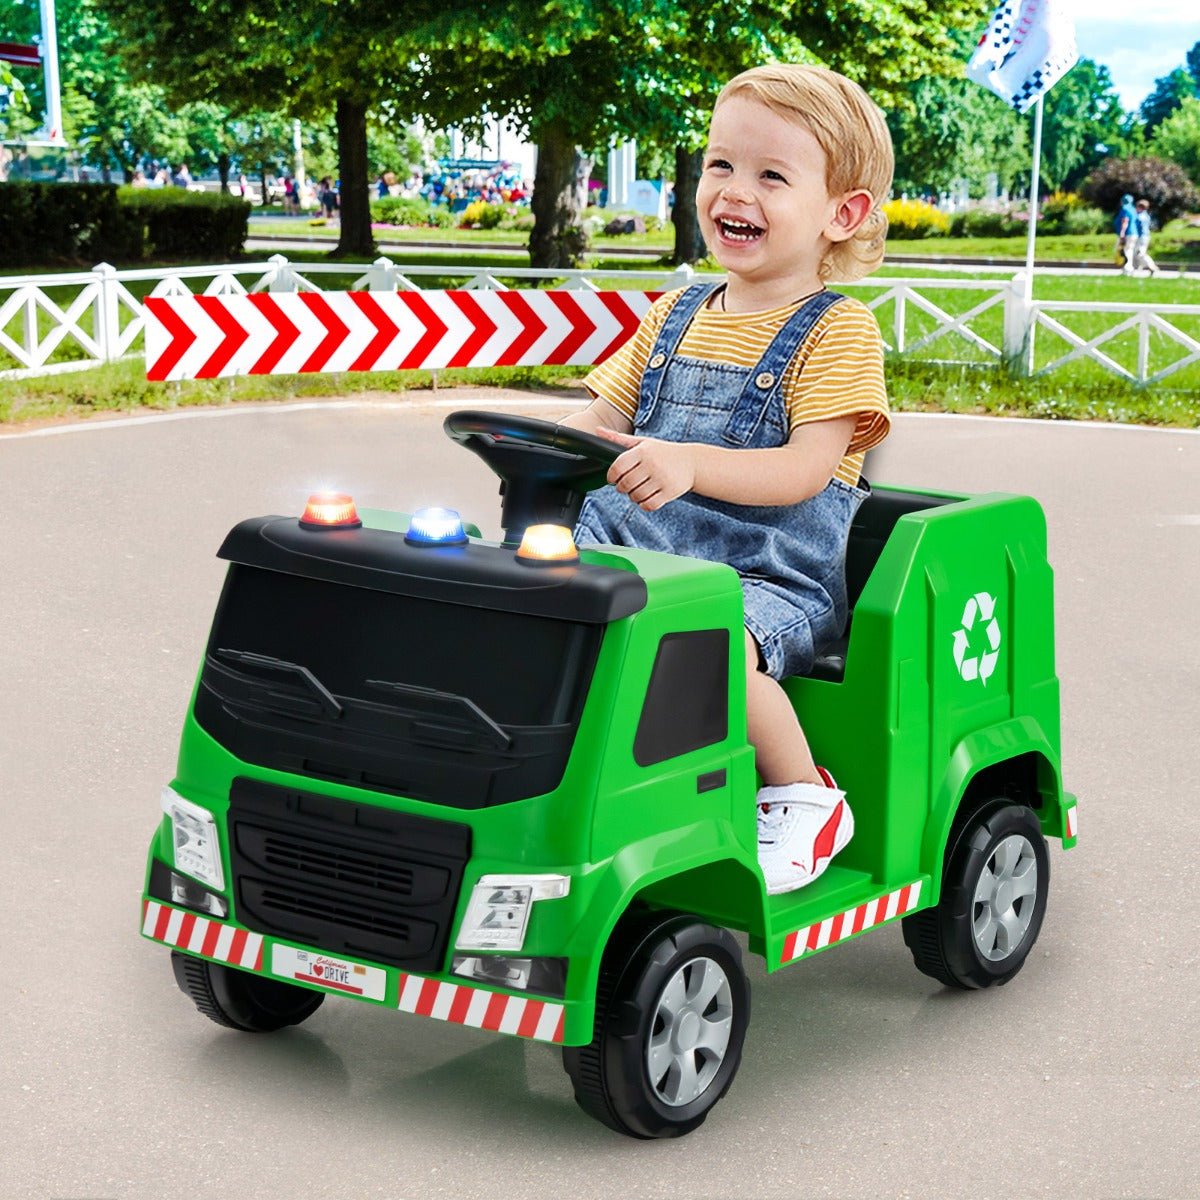 Green Dream Ride: 12V Kids Ride On Garbage Truck with Remote Control